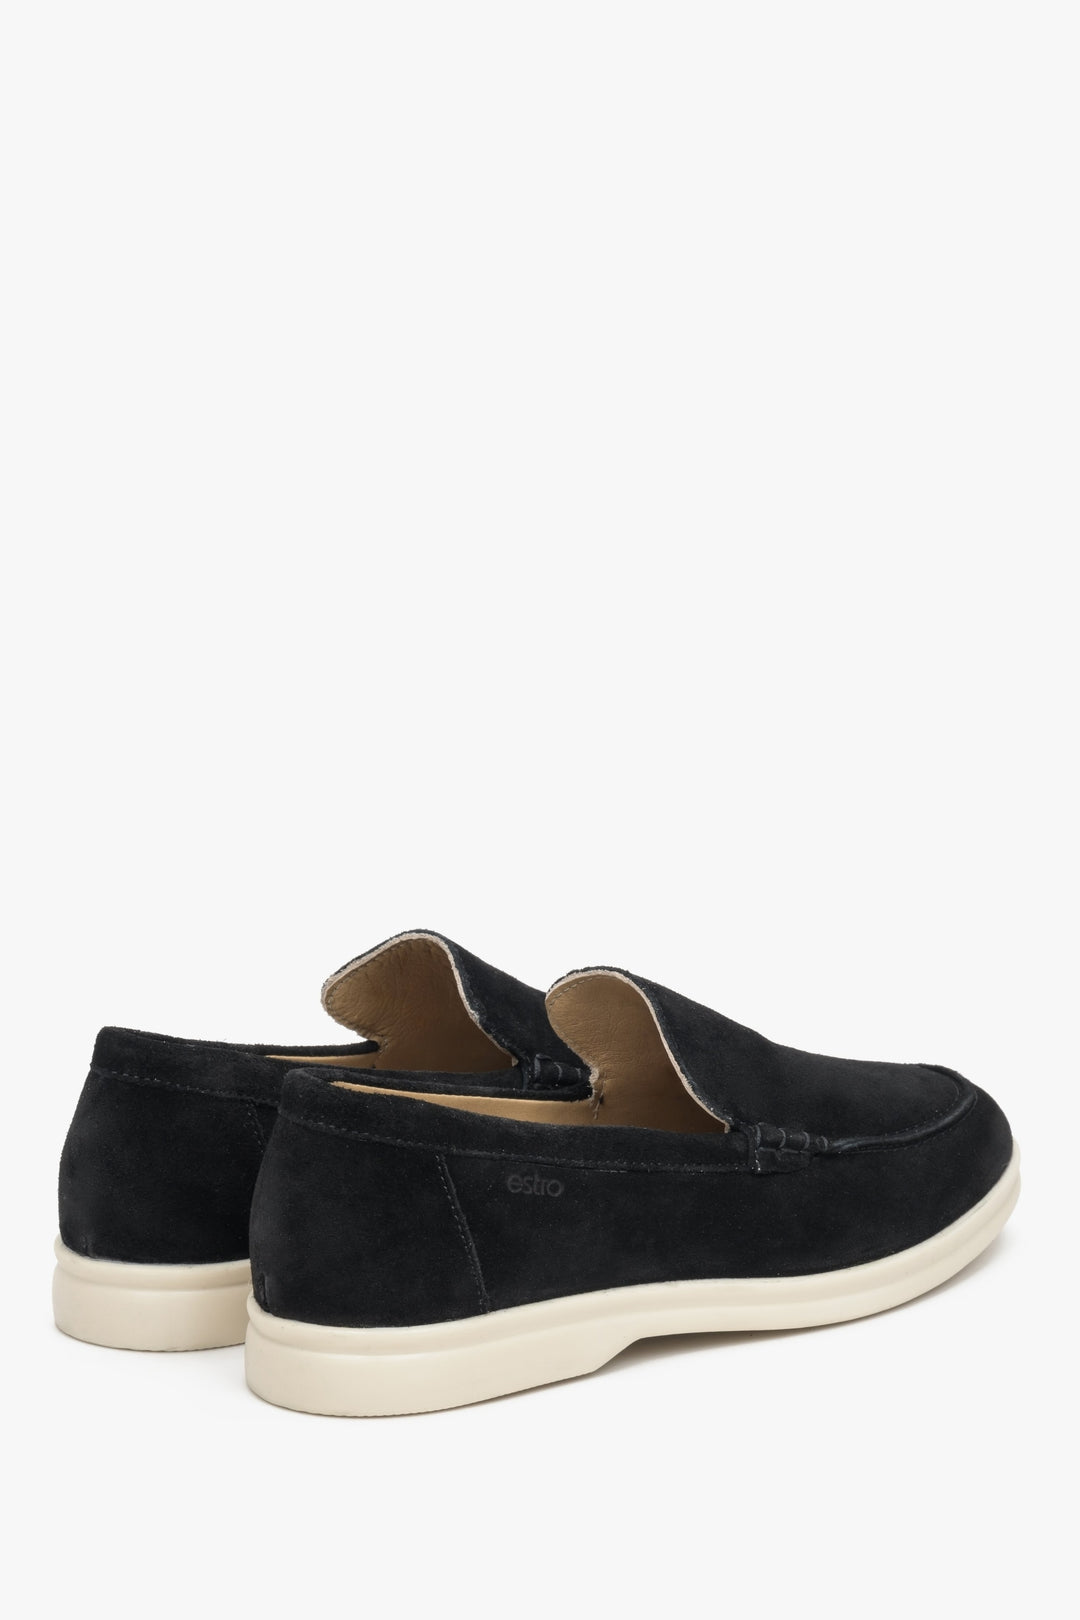 Women's loafers in black velour - presentation of the back part of the footwear.